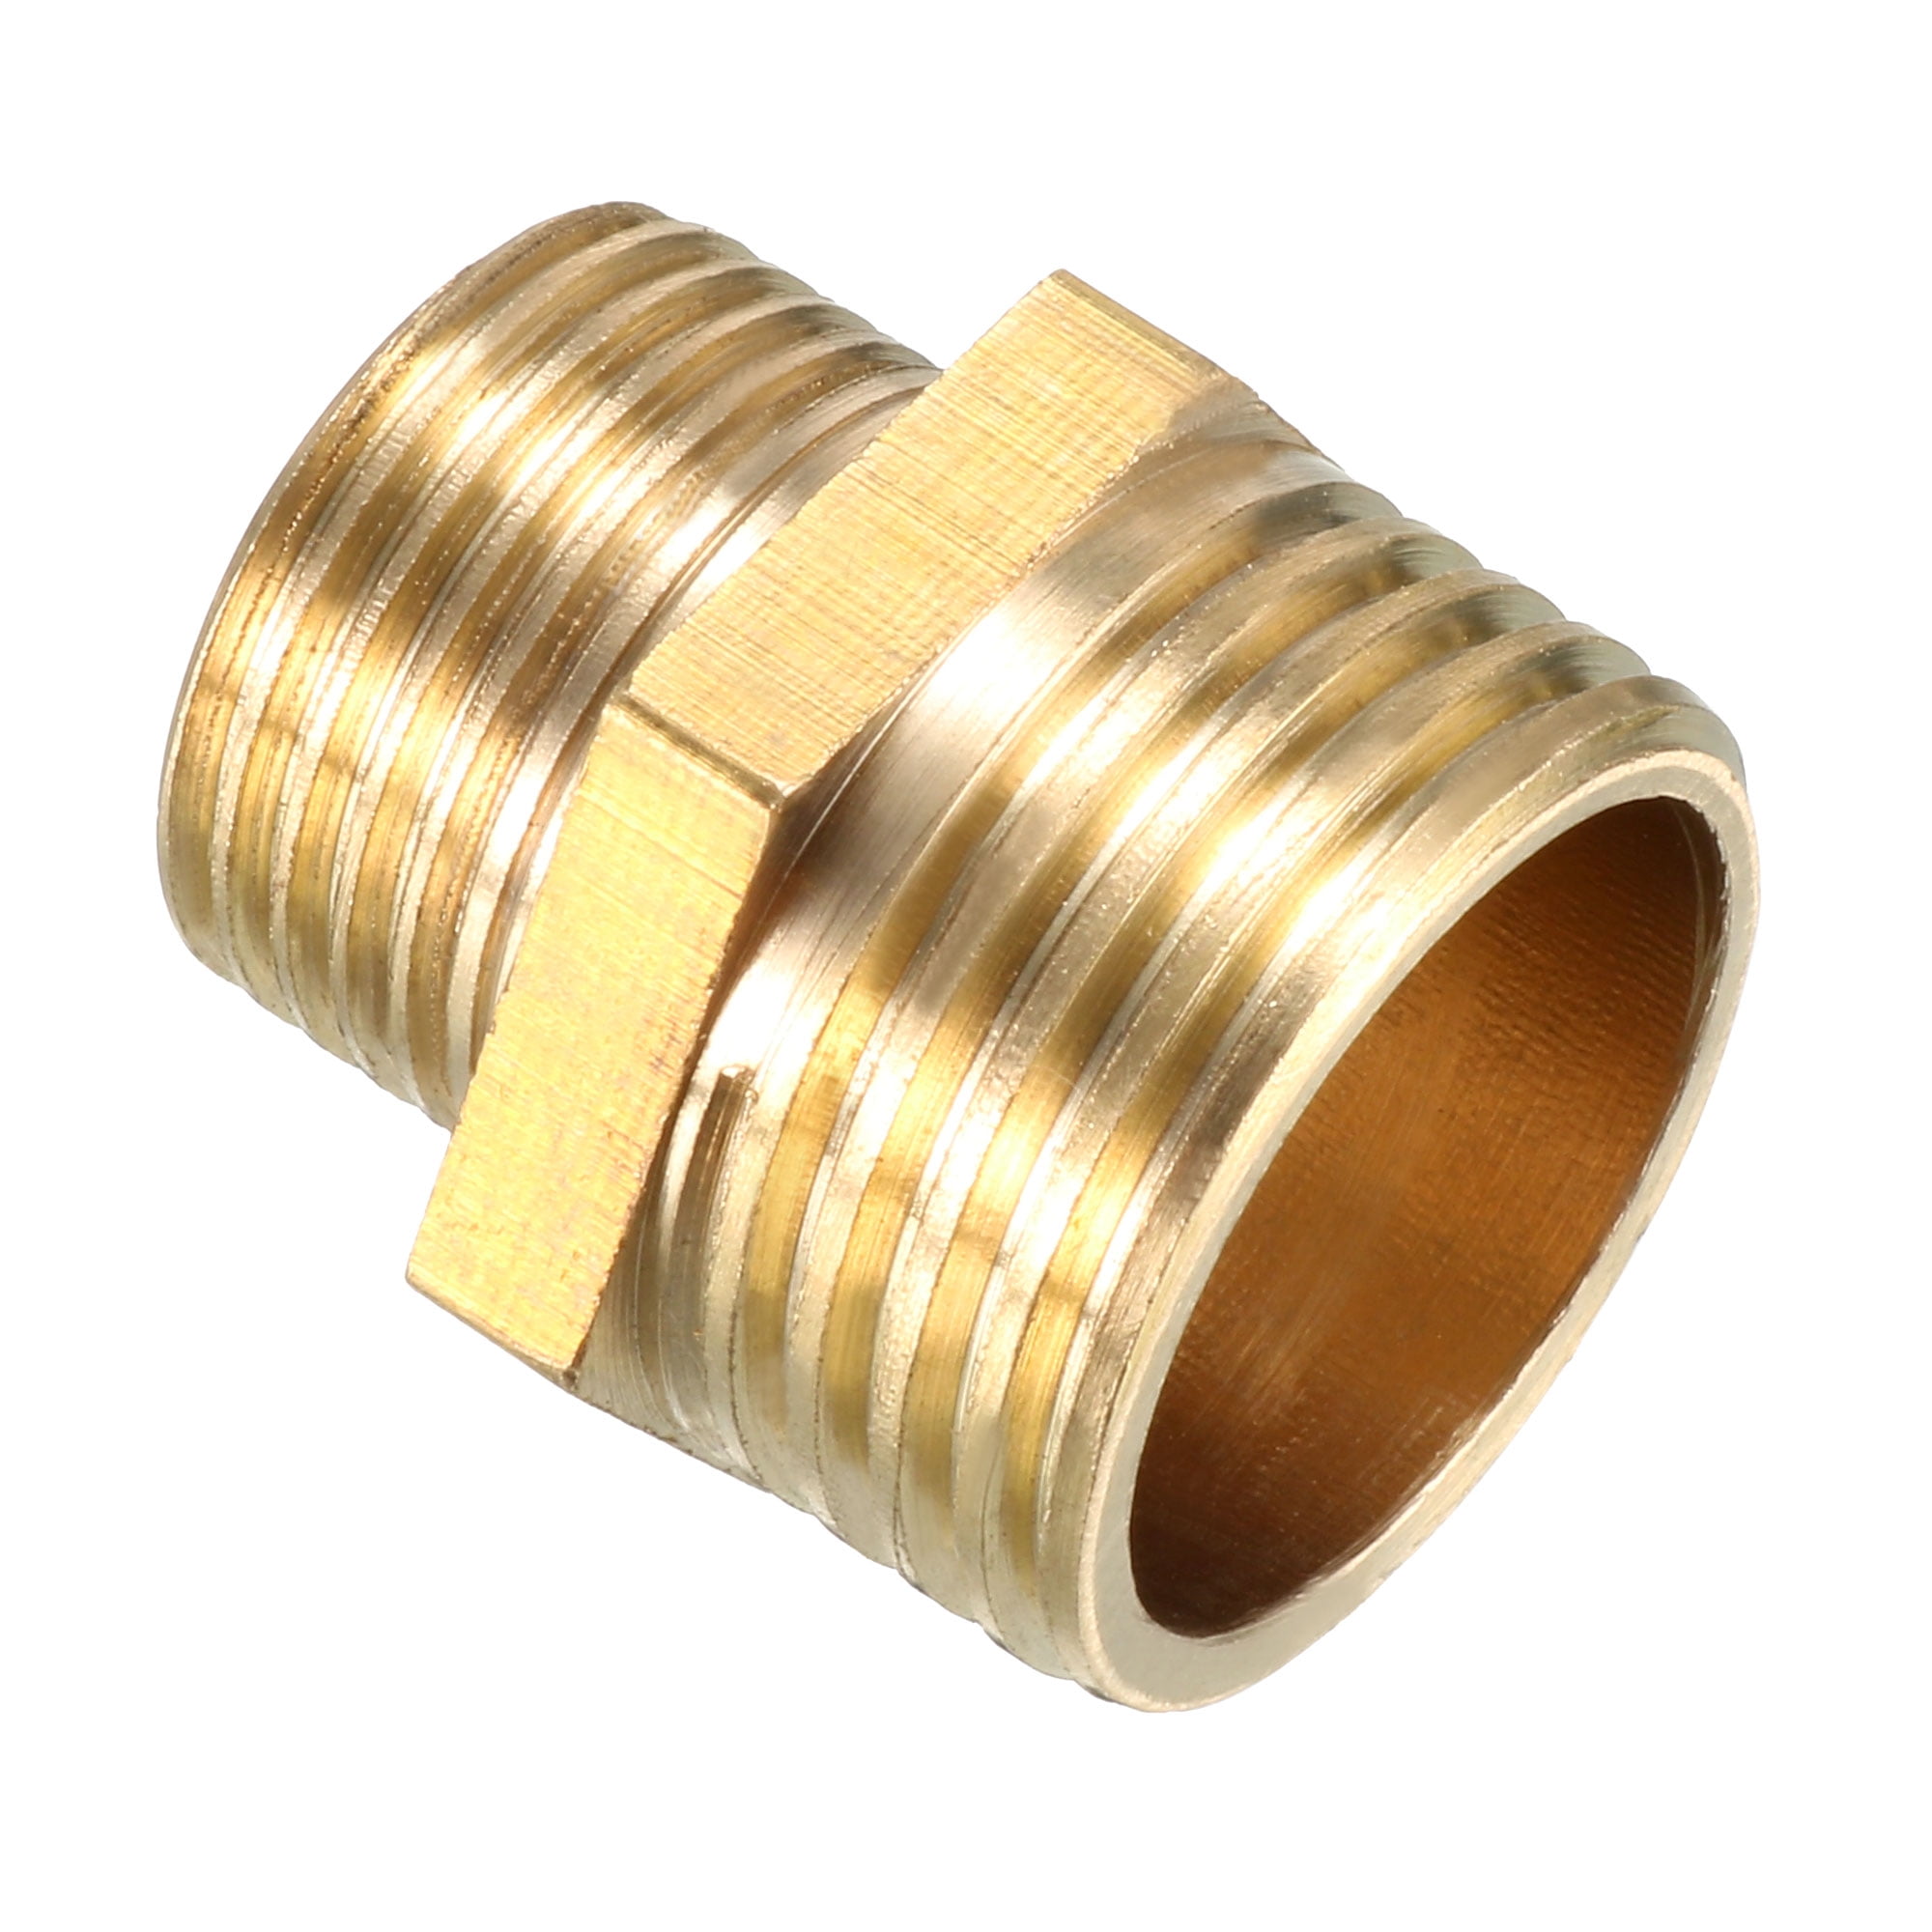 Brass Pipe Fitting, Reducing Hex Nipple 1/2 BSP Male x 3/8 PT Male Adapter - Walmart.com 1 2 To 3 8 Male Reducer